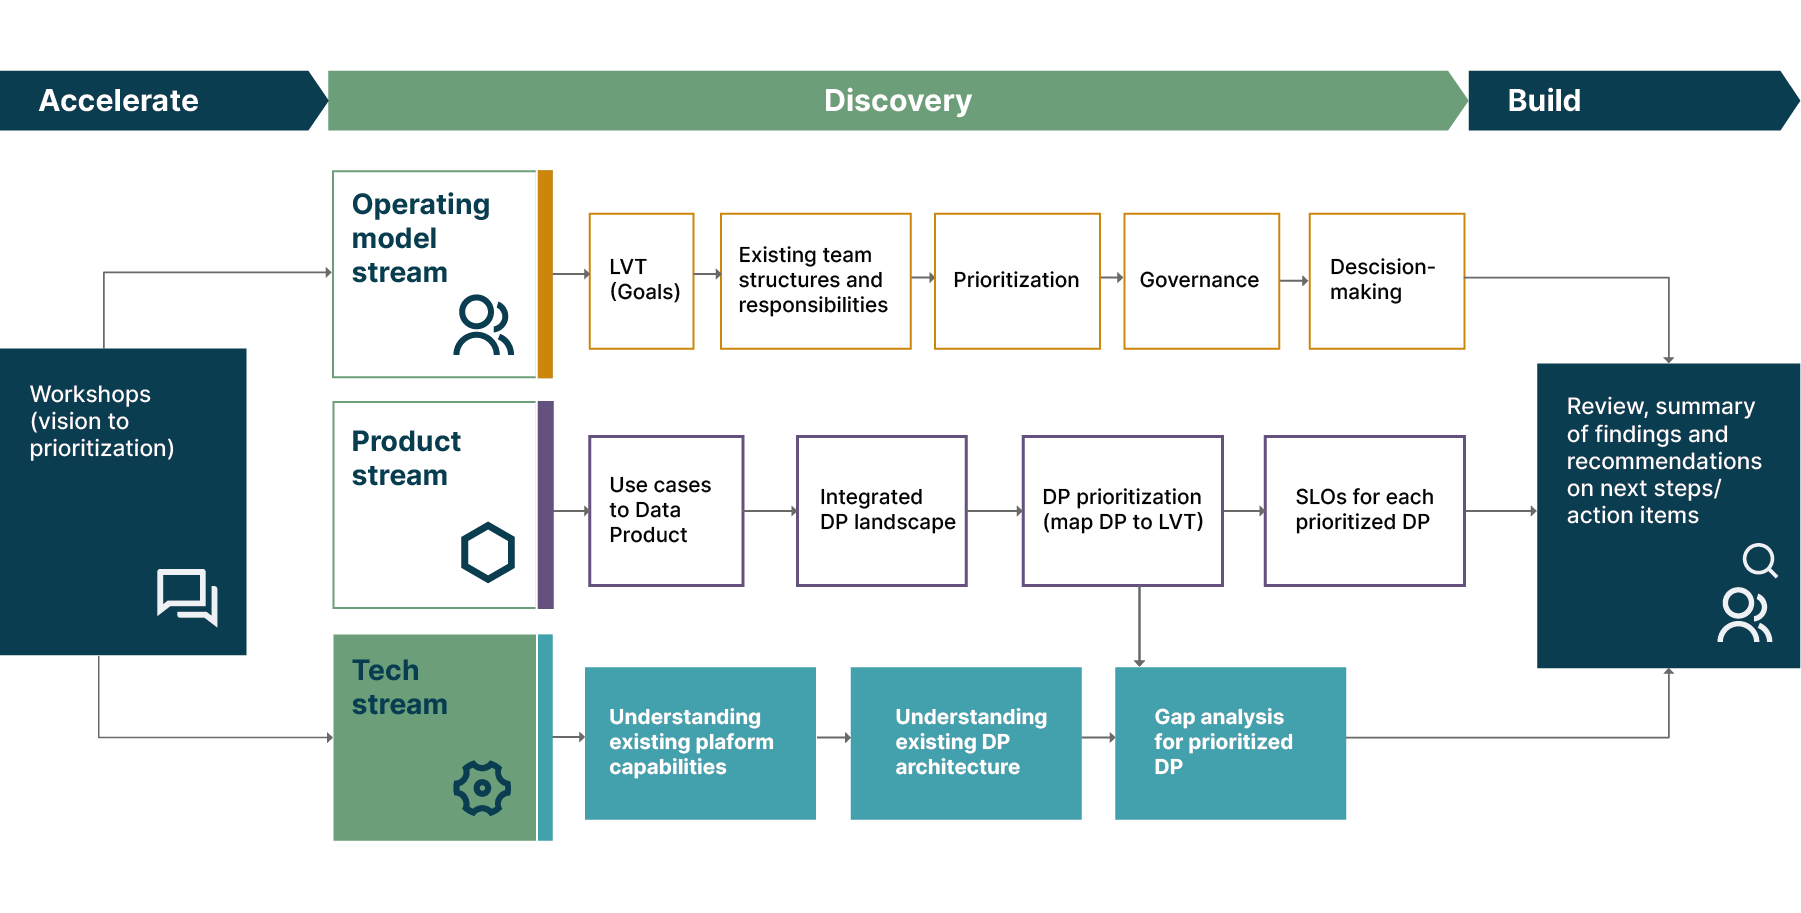 Three-stream discovery process across multiple domains at a major healthcare company. Here the focus is on the technology stream.